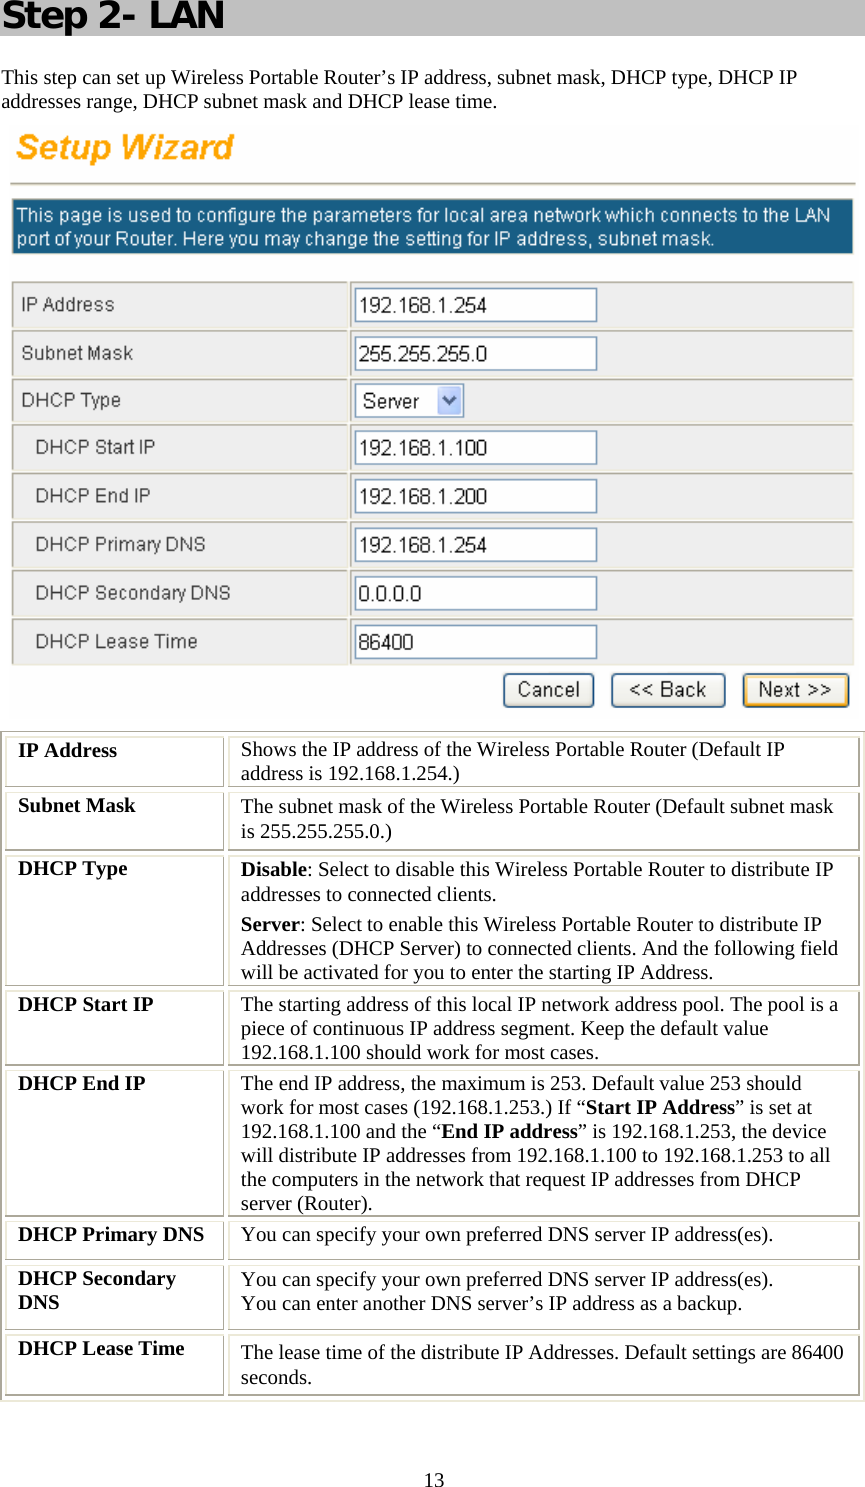   13Step 2- LAN This step can set up Wireless Portable Router’s IP address, subnet mask, DHCP type, DHCP IP addresses range, DHCP subnet mask and DHCP lease time.  IP Address  Shows the IP address of the Wireless Portable Router (Default IP address is 192.168.1.254.) Subnet Mask  The subnet mask of the Wireless Portable Router (Default subnet mask is 255.255.255.0.) DHCP Type  Disable: Select to disable this Wireless Portable Router to distribute IP addresses to connected clients. Server: Select to enable this Wireless Portable Router to distribute IP Addresses (DHCP Server) to connected clients. And the following field will be activated for you to enter the starting IP Address. DHCP Start IP  The starting address of this local IP network address pool. The pool is a piece of continuous IP address segment. Keep the default value 192.168.1.100 should work for most cases. DHCP End IP  The end IP address, the maximum is 253. Default value 253 should work for most cases (192.168.1.253.) If “Start IP Address” is set at 192.168.1.100 and the “End IP address” is 192.168.1.253, the device will distribute IP addresses from 192.168.1.100 to 192.168.1.253 to all the computers in the network that request IP addresses from DHCP server (Router). DHCP Primary DNS  You can specify your own preferred DNS server IP address(es).  DHCP Secondary DNS  You can specify your own preferred DNS server IP address(es).  You can enter another DNS server’s IP address as a backup. DHCP Lease Time  The lease time of the distribute IP Addresses. Default settings are 86400 seconds.  